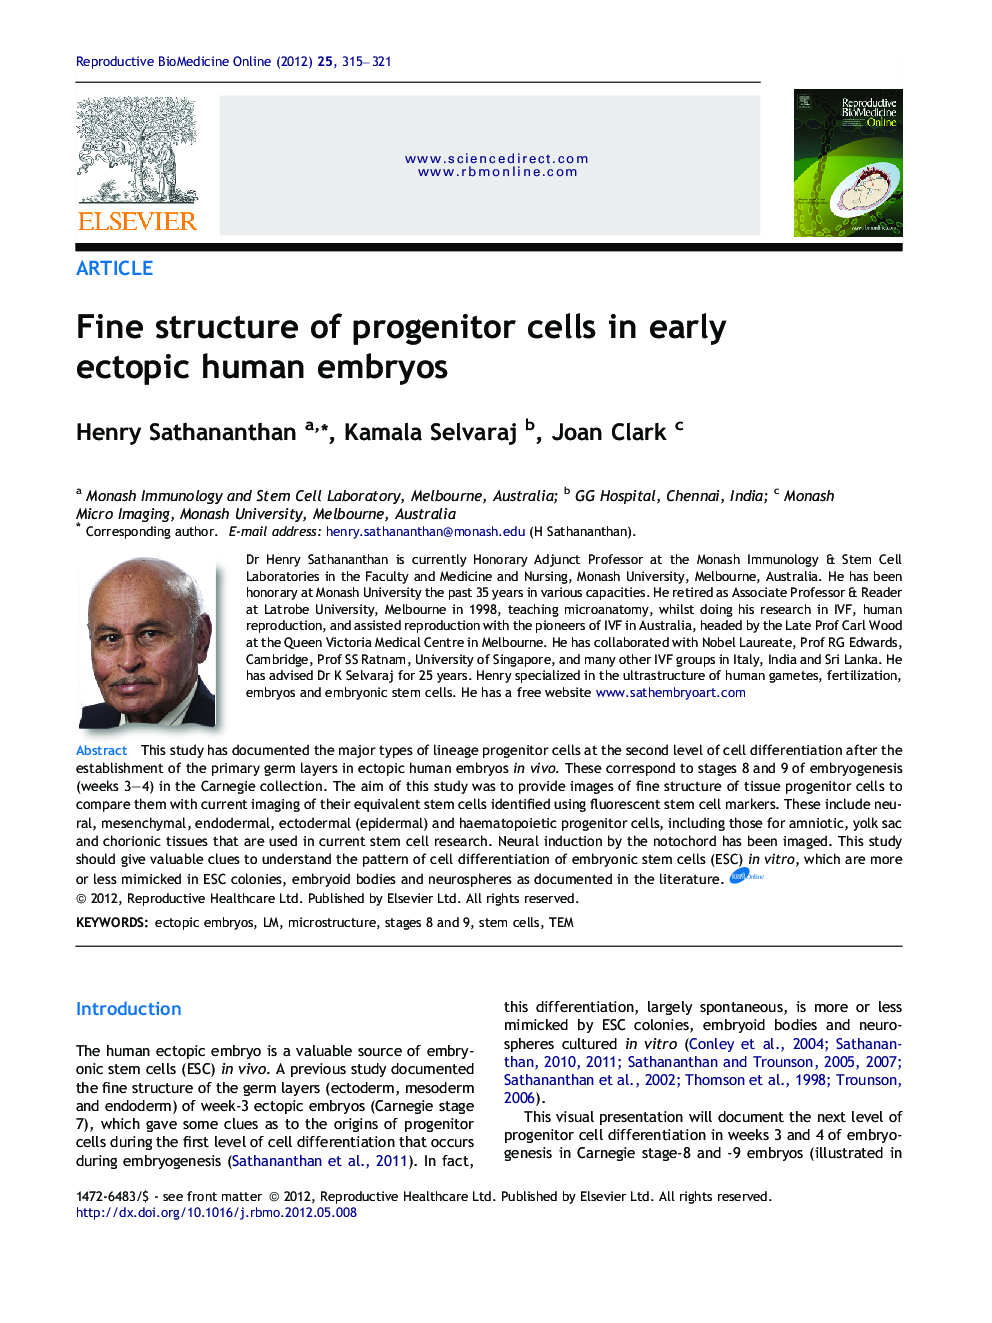 Fine structure of progenitor cells in early ectopic human embryos 